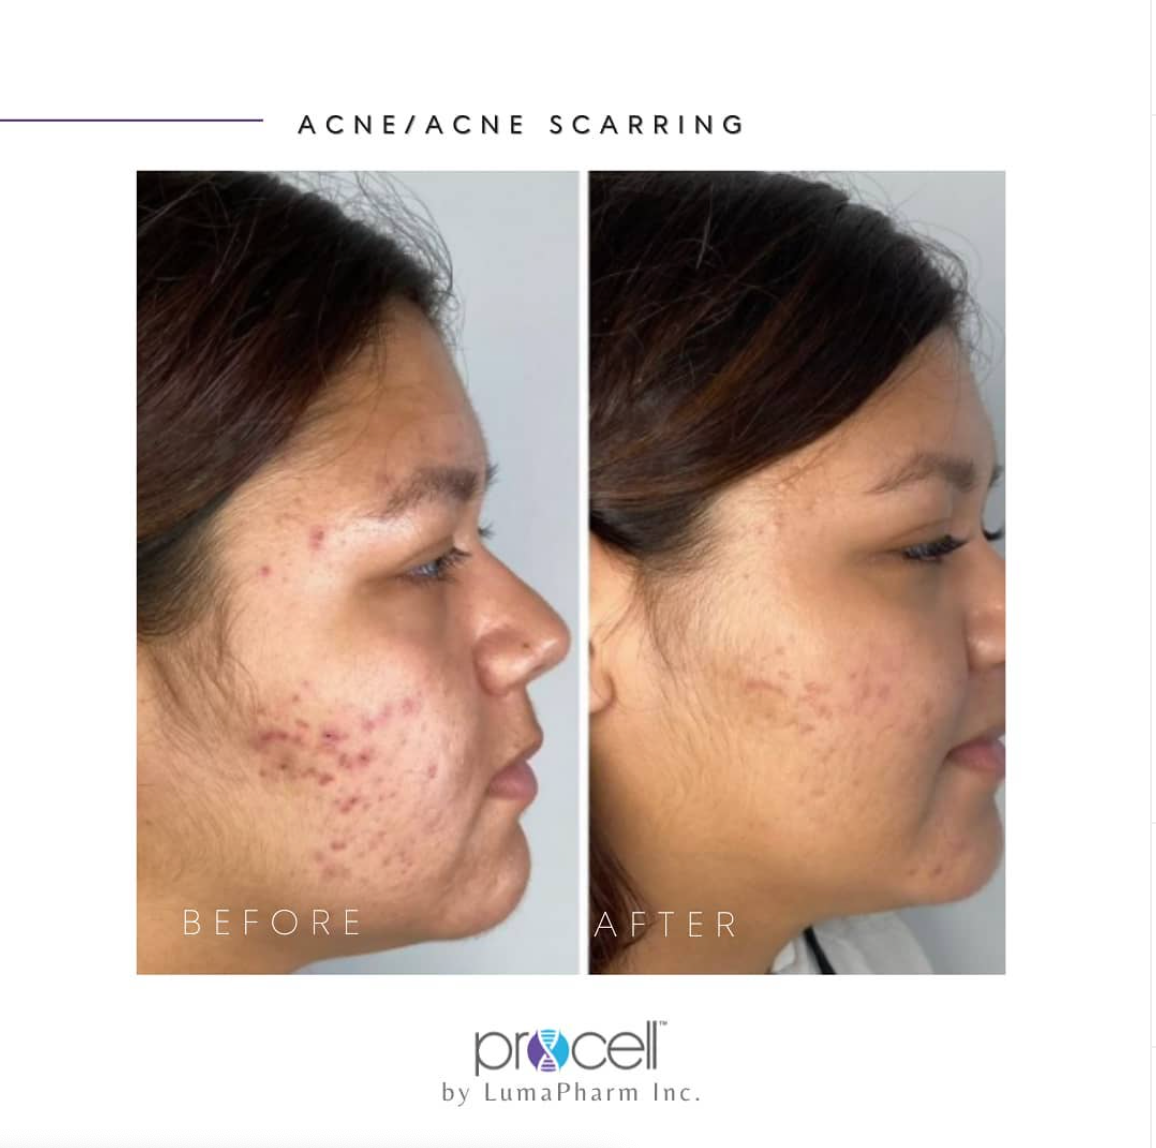 A before and after photo of acne scarring on a woman 's face